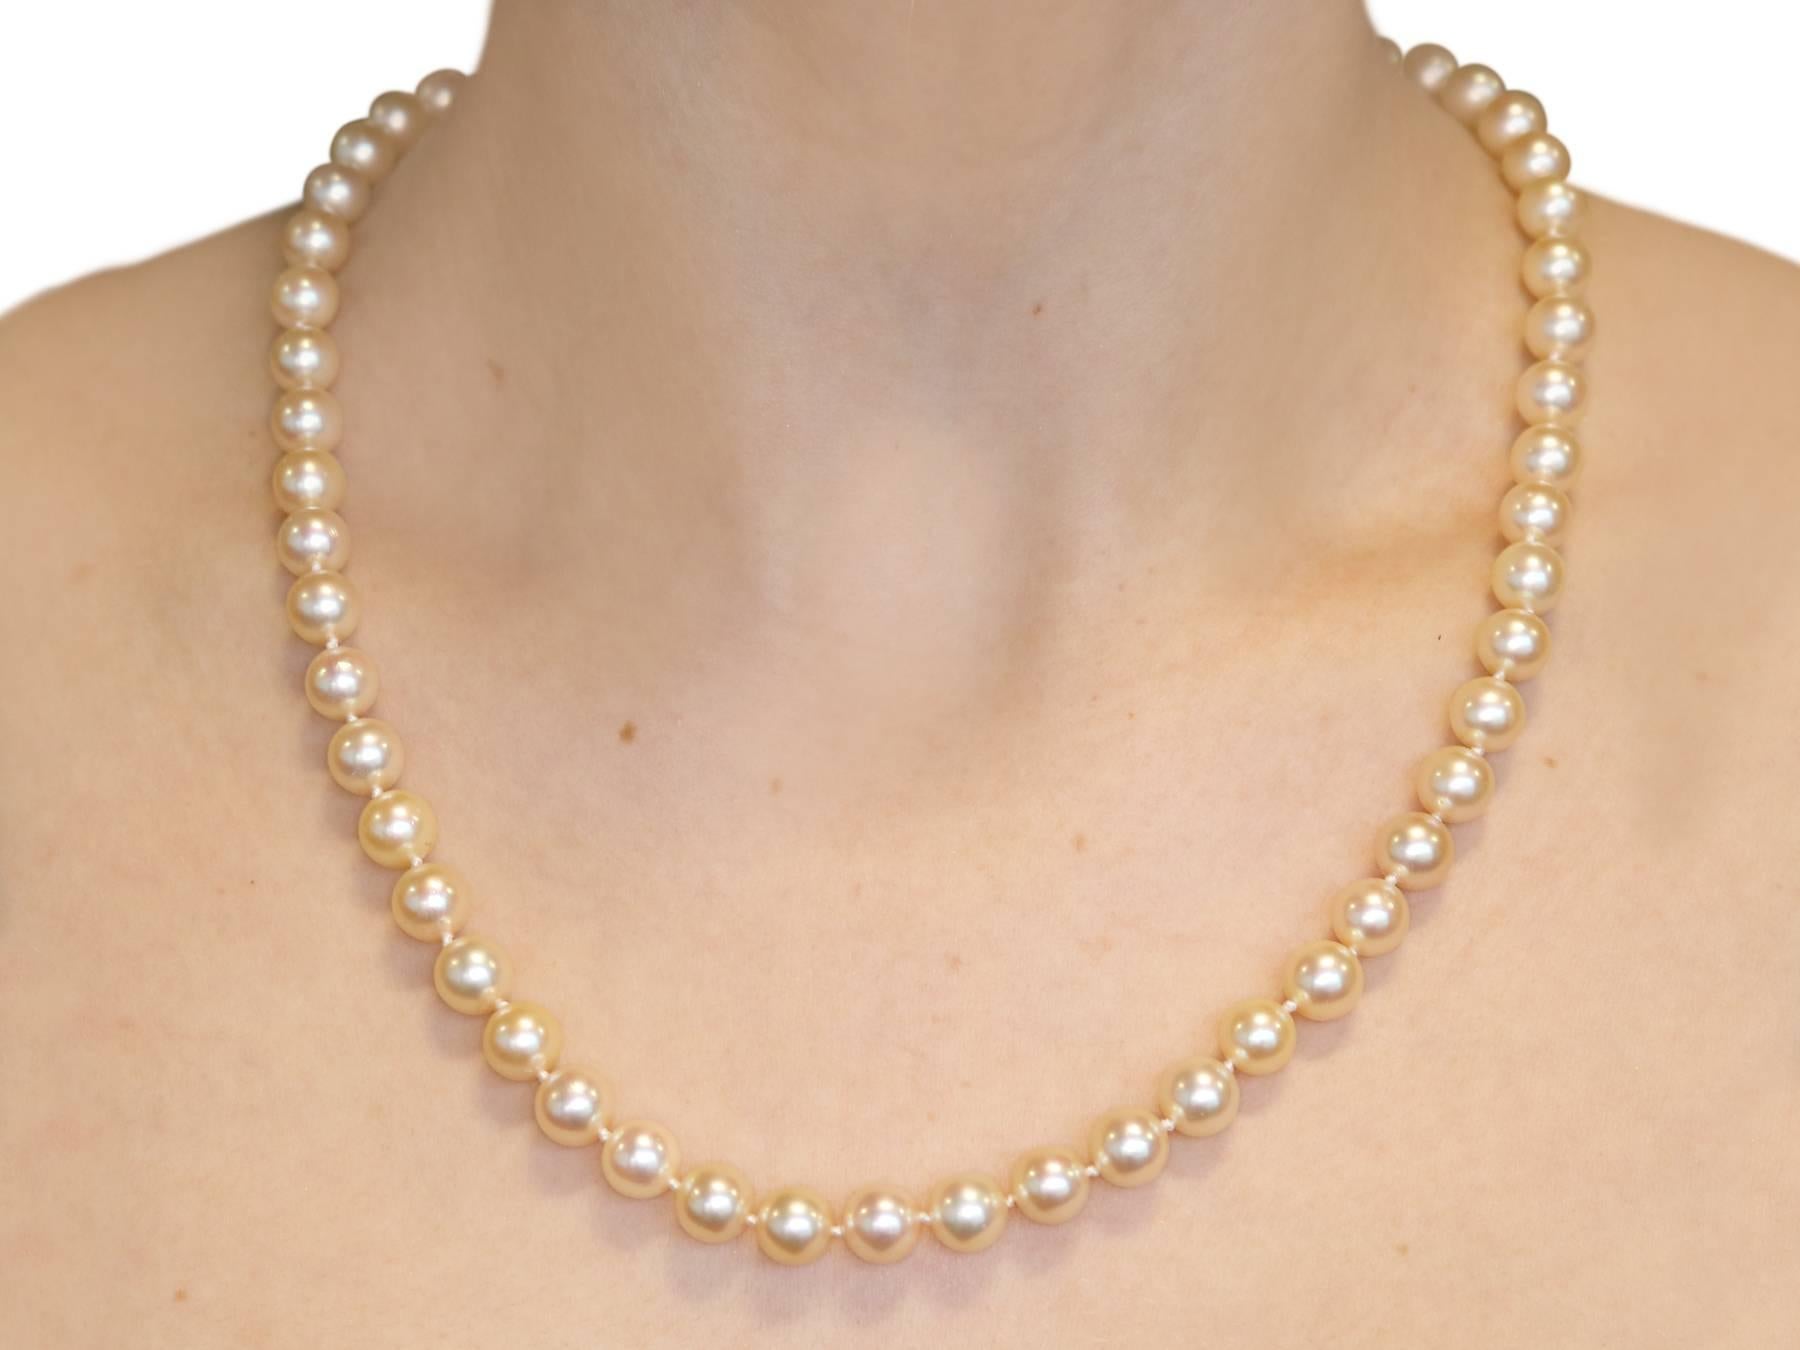 Vintage 1980s Single Strand Cultured Pearl Necklace Yellow Gold Clasp For Sale 2